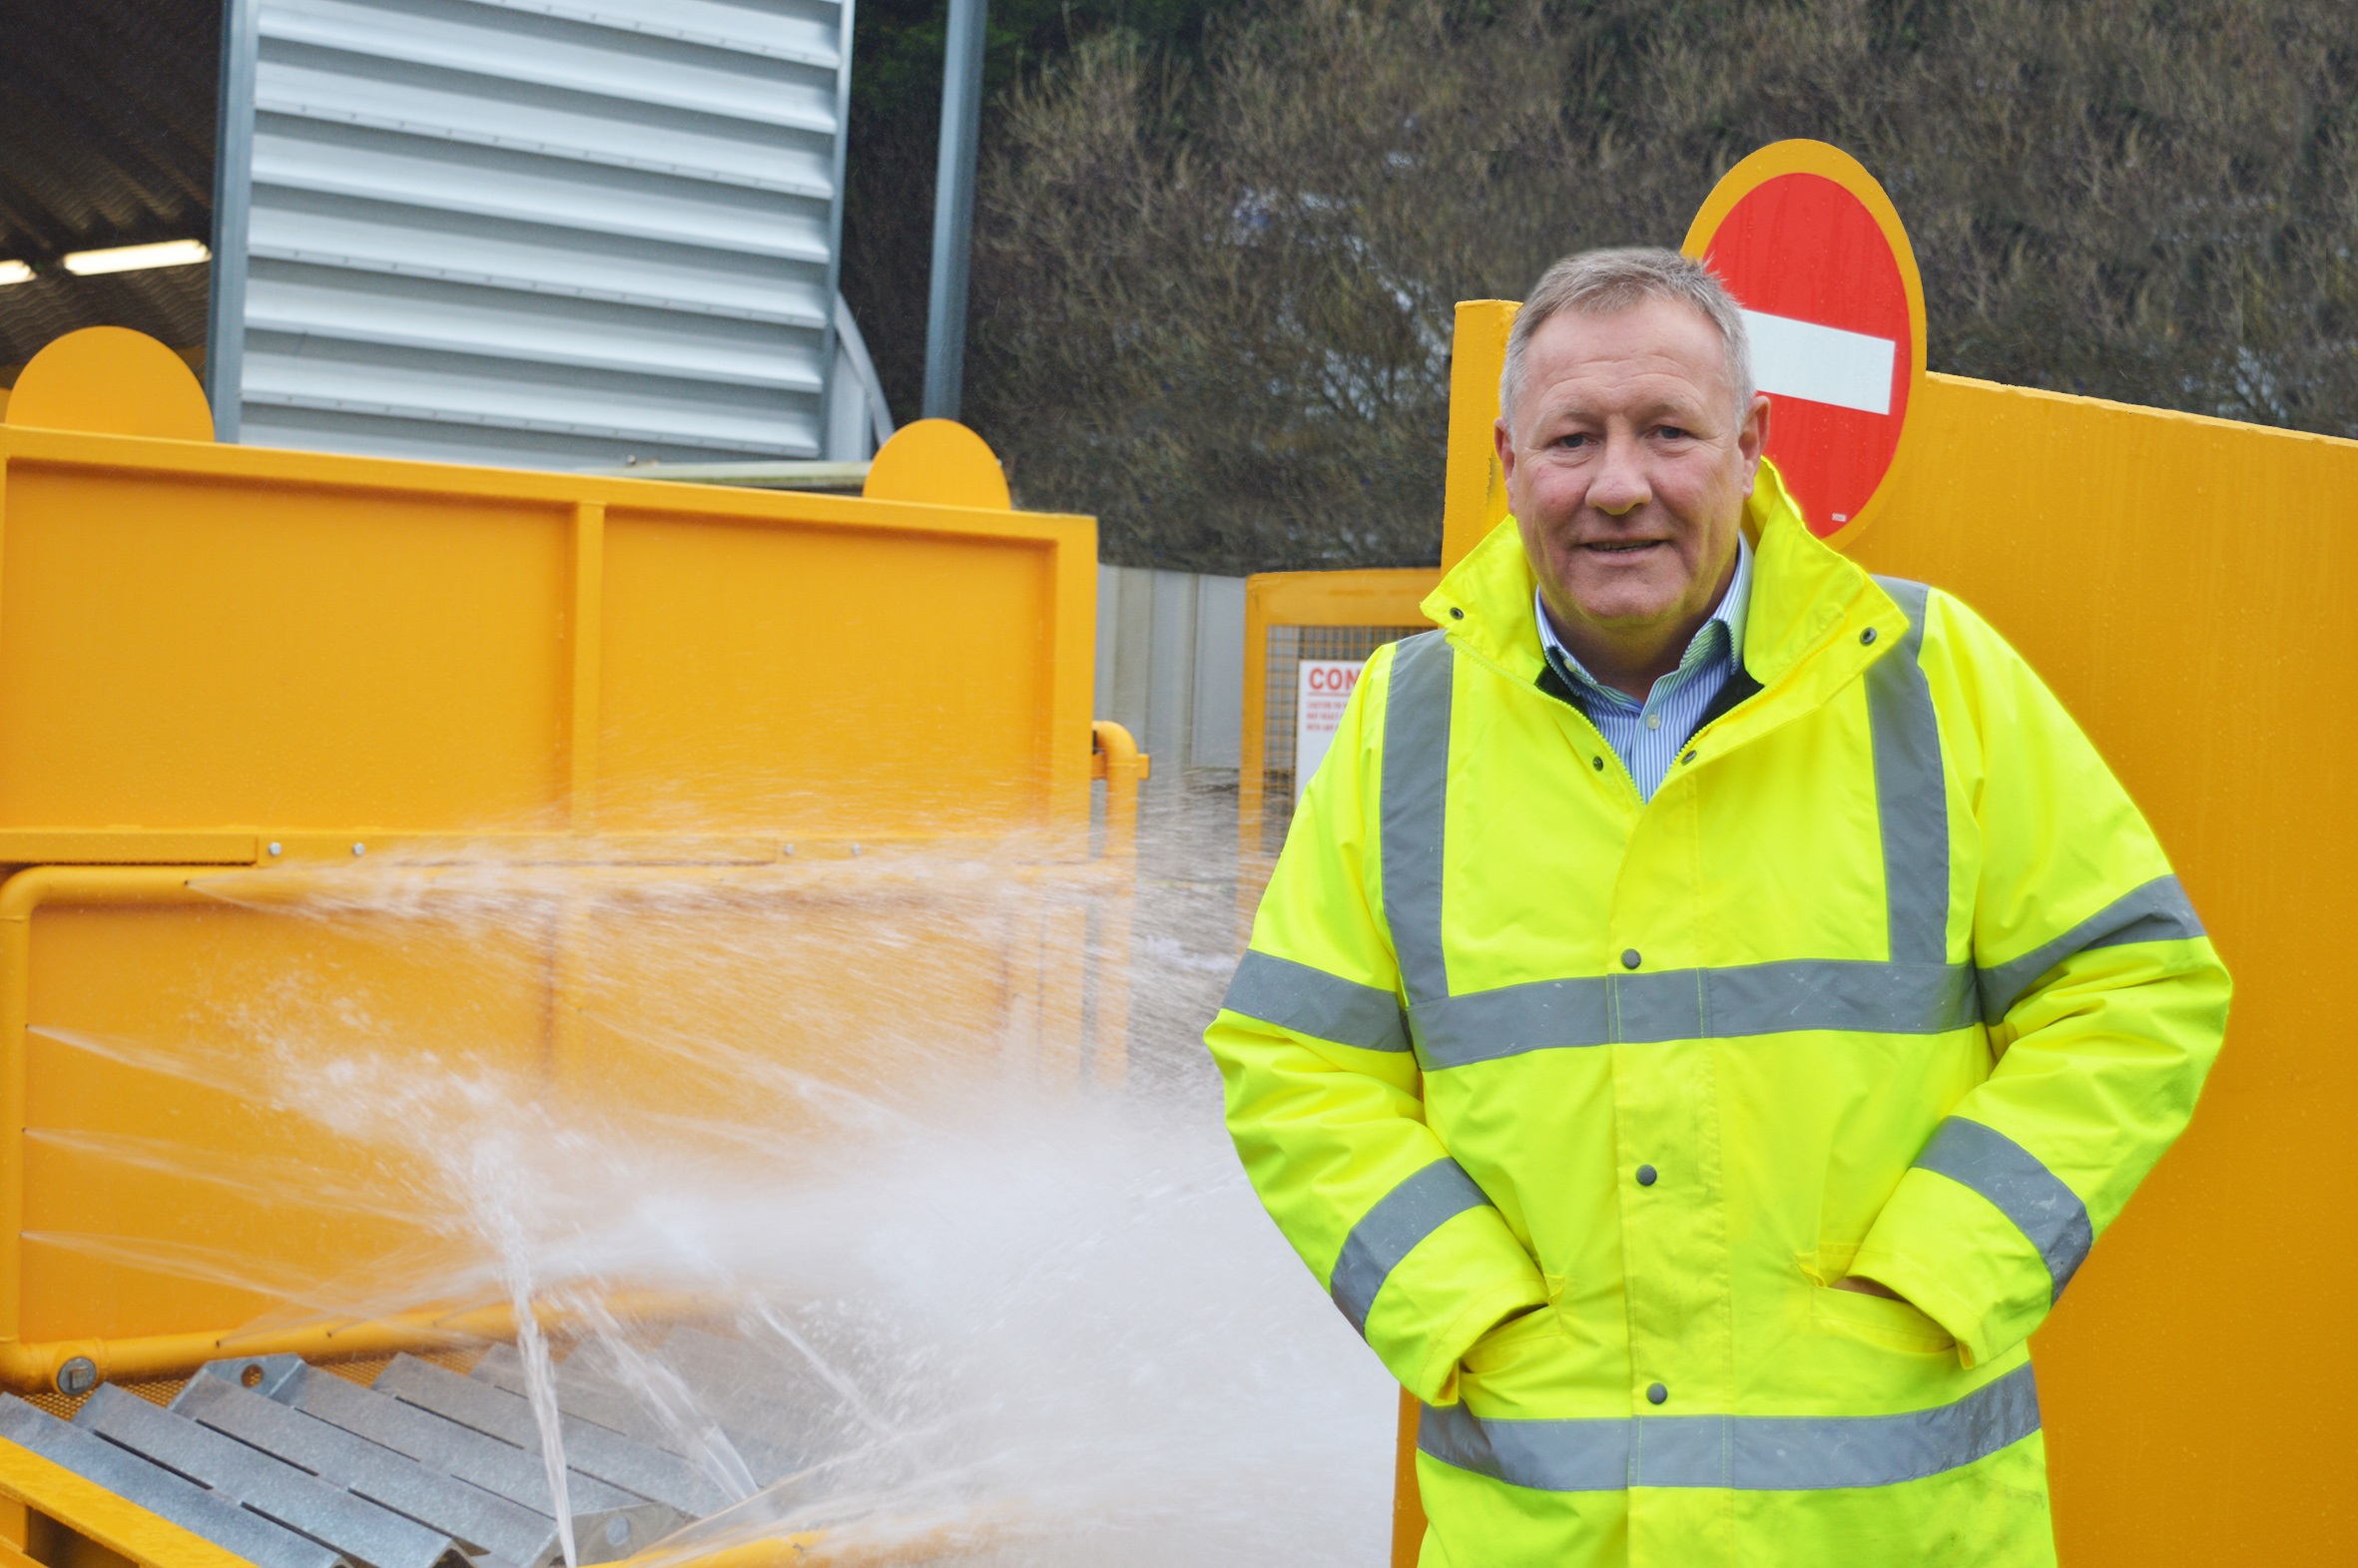 Construction site equipment specialist Garic appoints Scottish regional manager